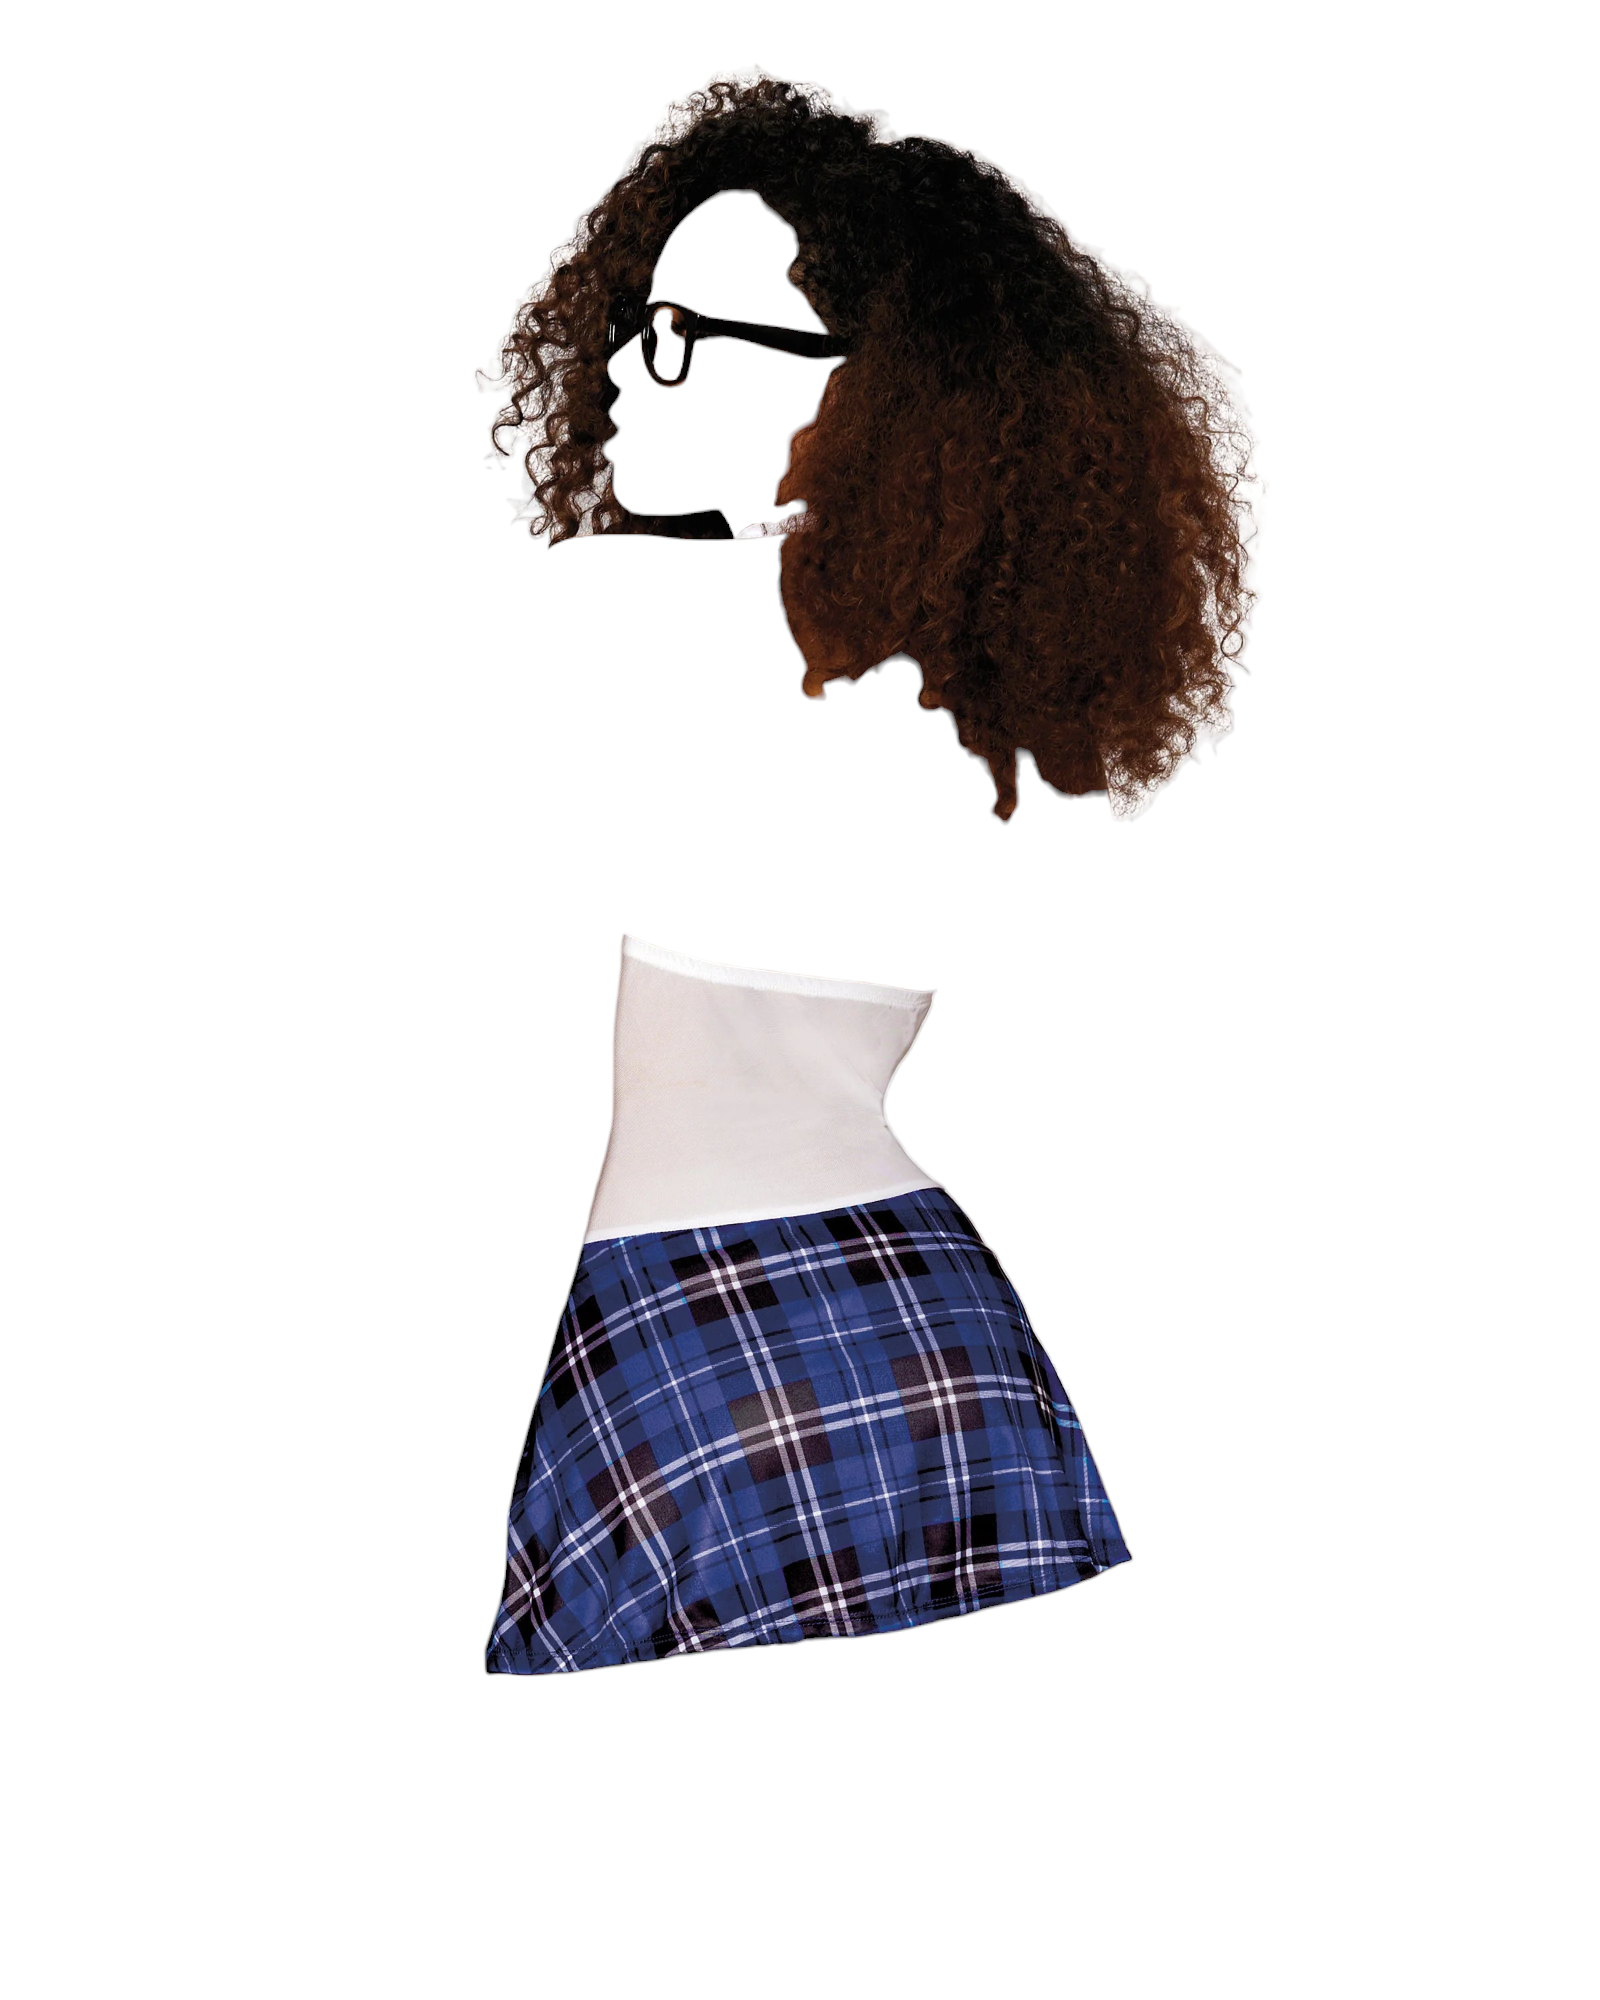 Dreamgirl Schoolgirl Tease Stretch Mesh Chemise with Pleated Skirt Roleplay Set Blue Plaid